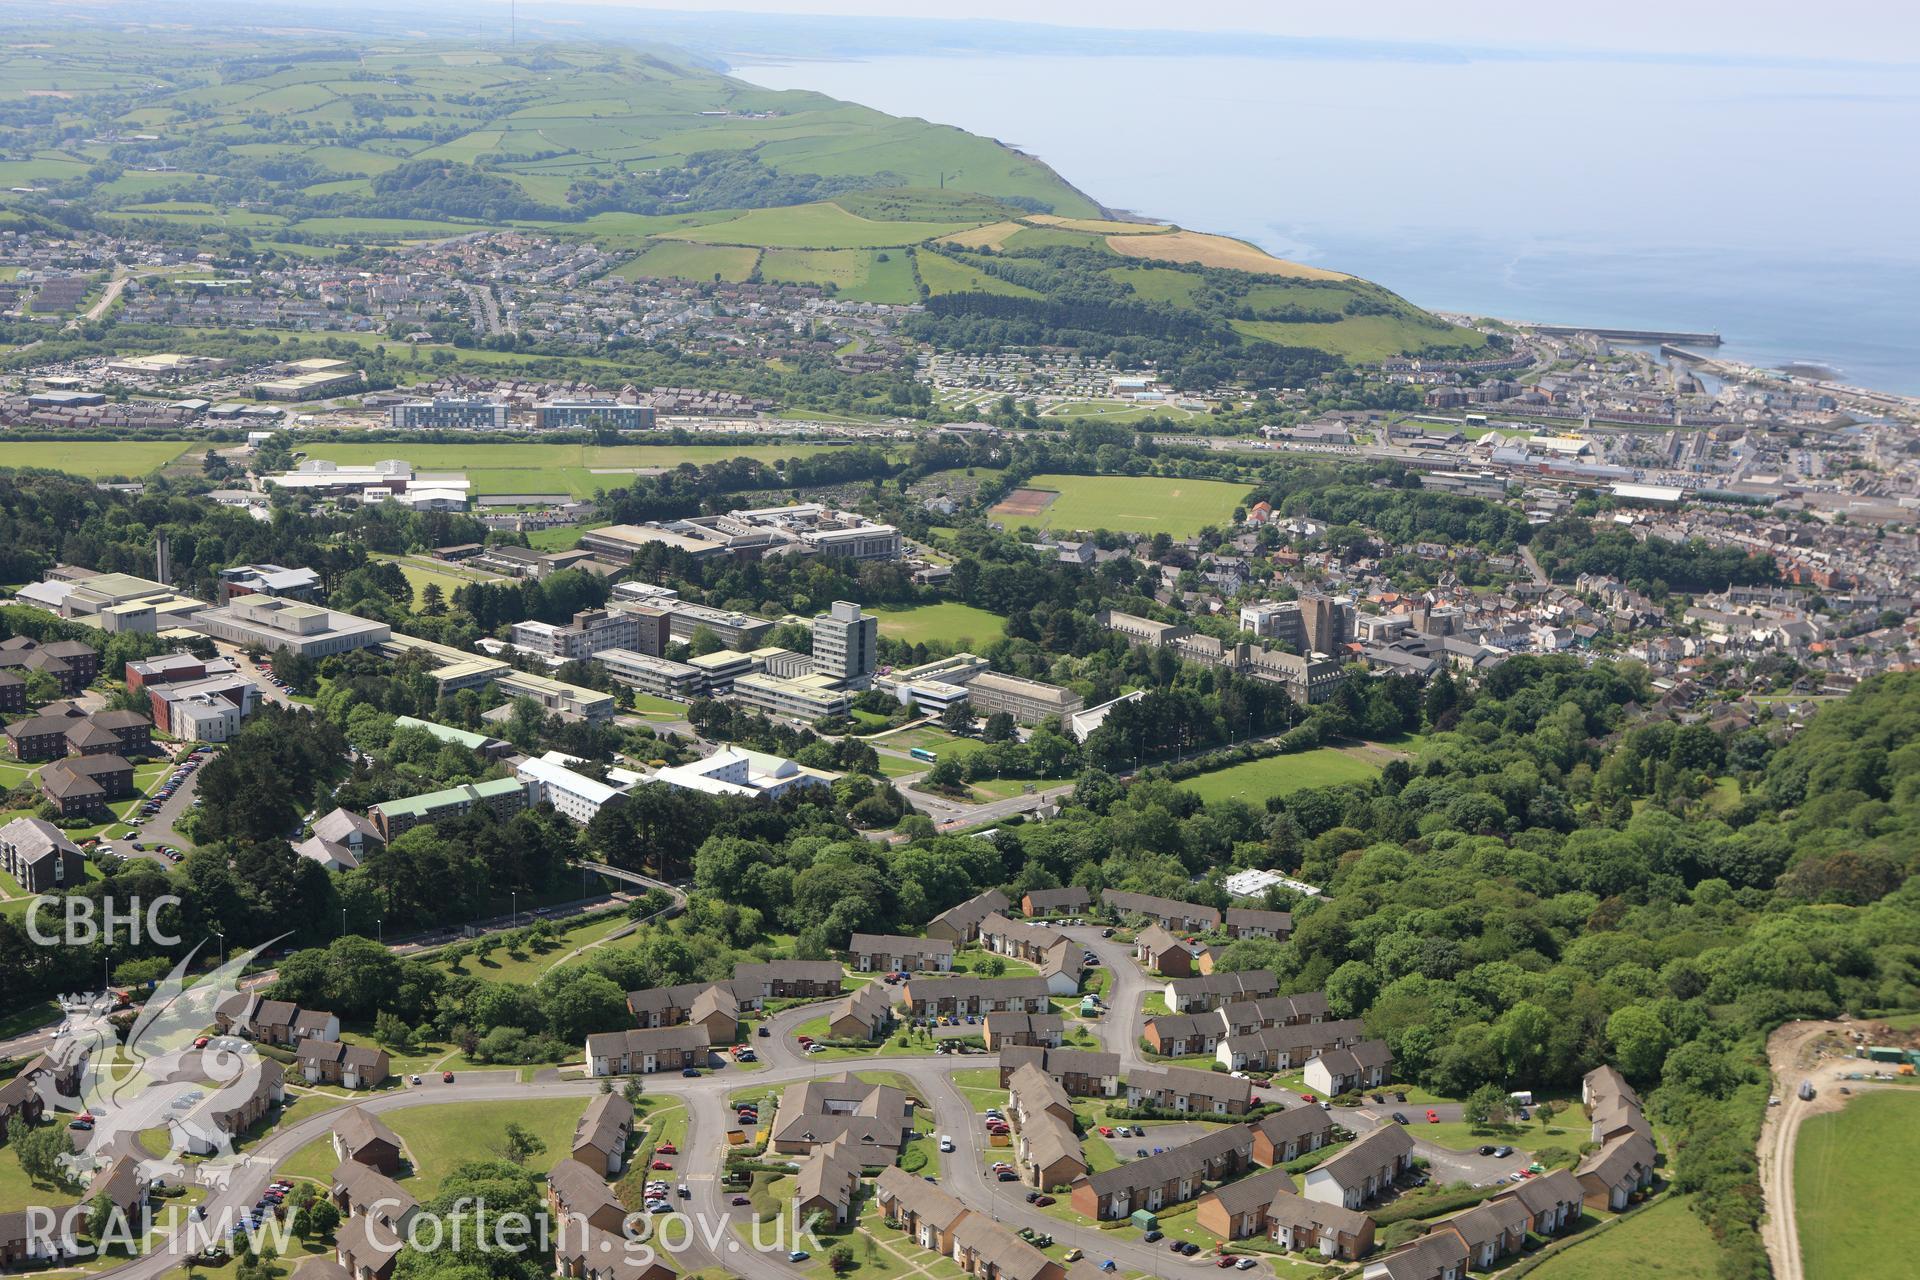 RCAHMW colour oblique aerial photograph of Aberystwyth and surrounding landscape. Taken on 02 June 2009 by Toby Driver